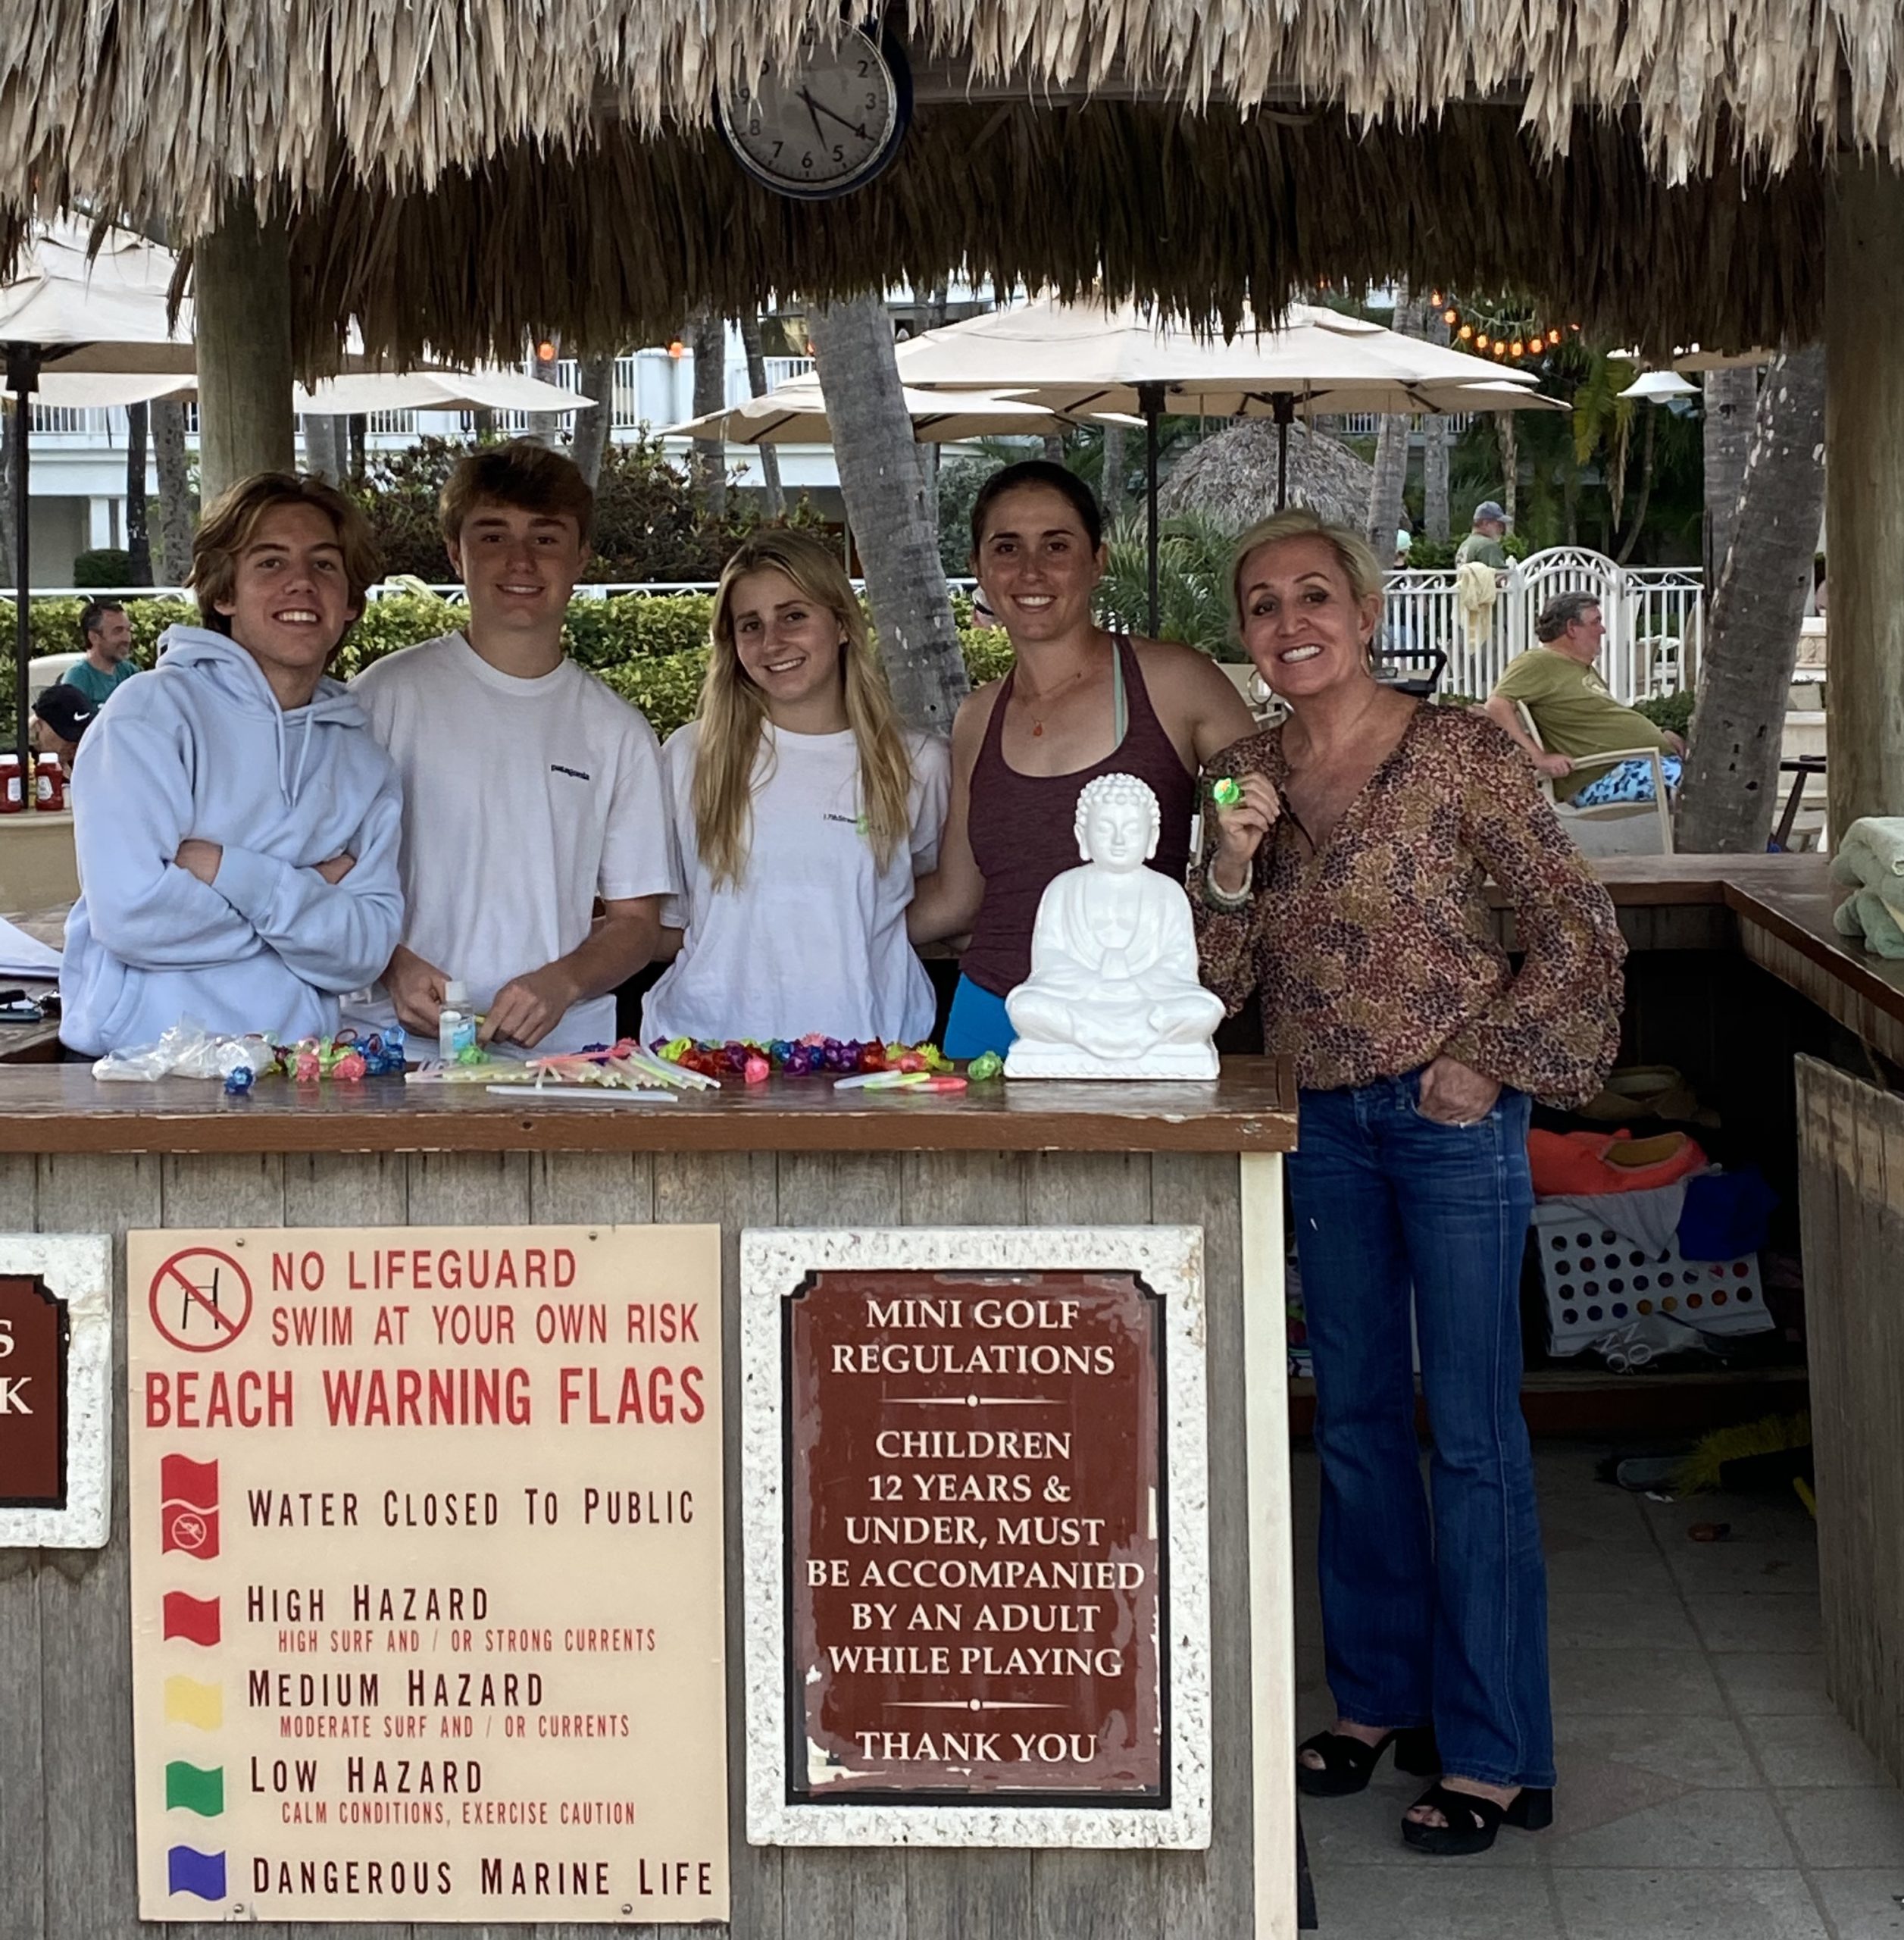 banks family fourth generation lago mar owners at towel hut glow jewelry